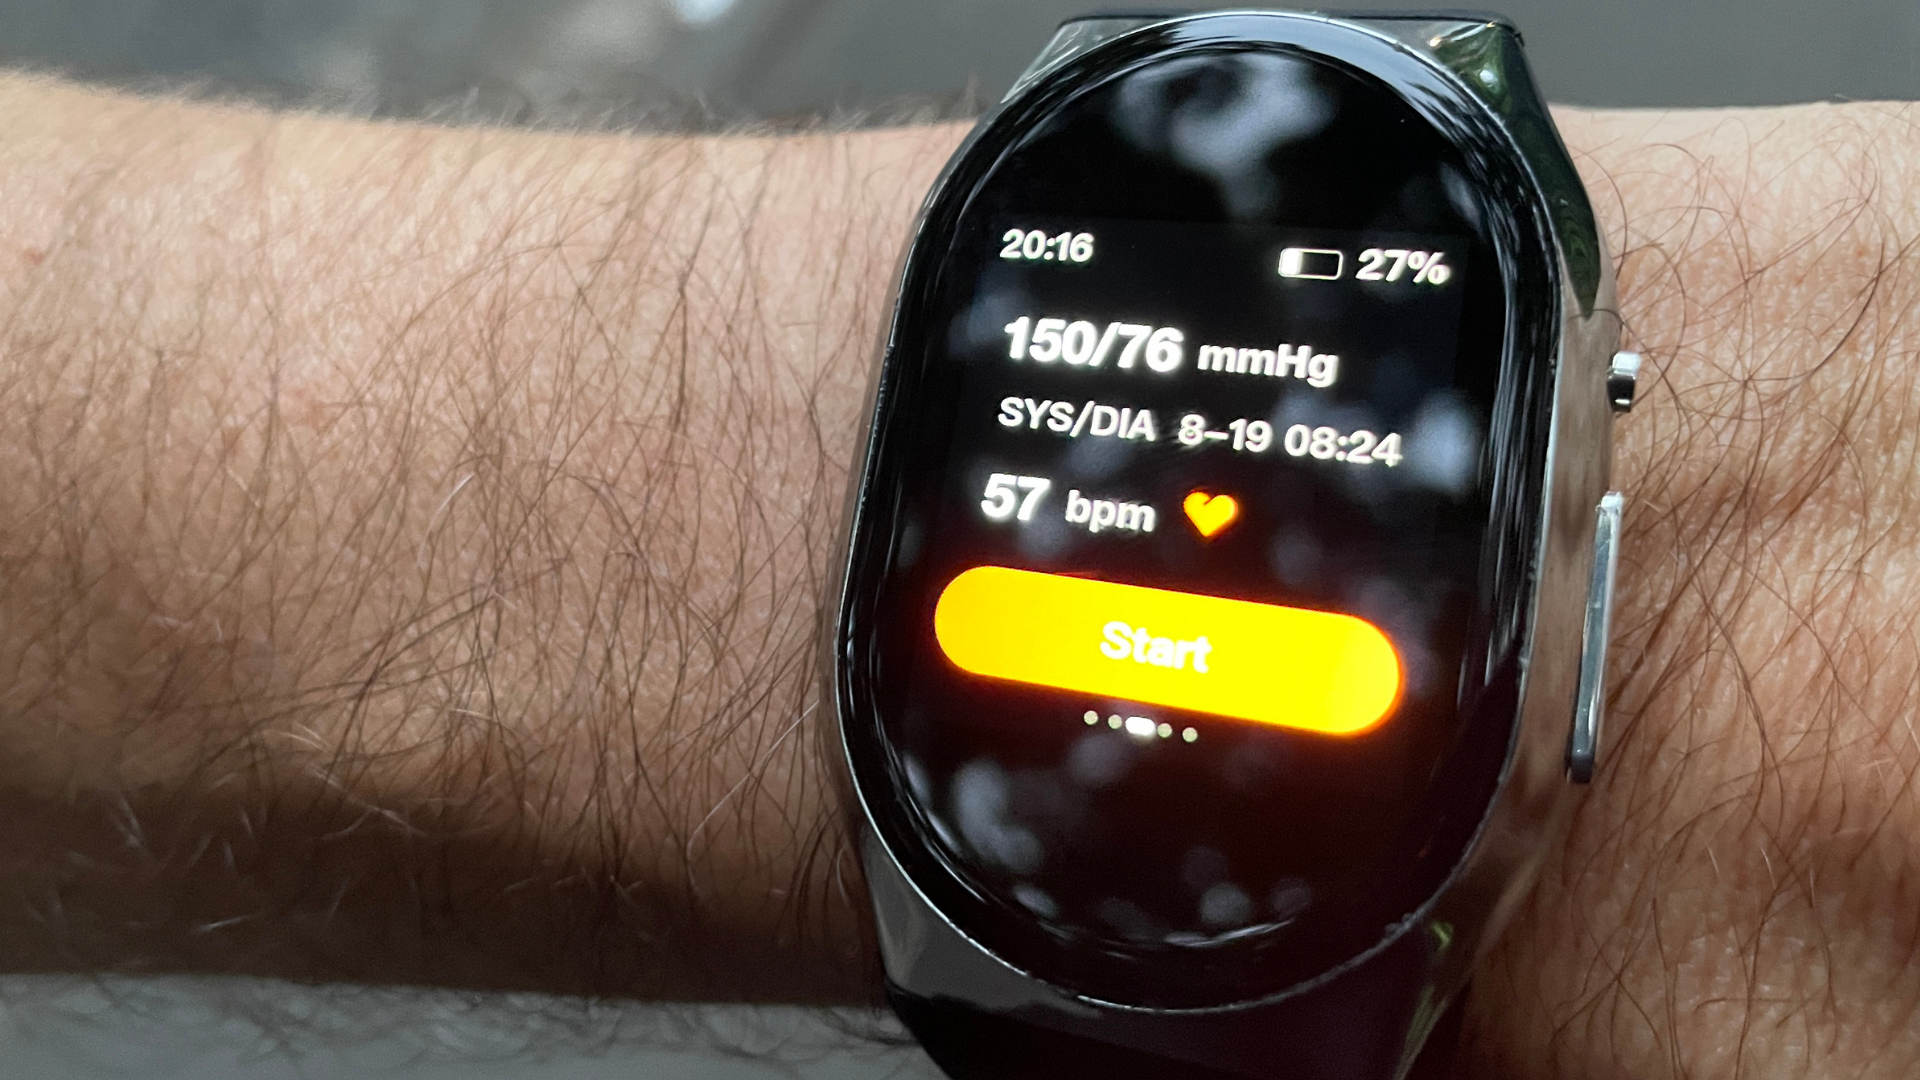 Video Apple Watch finds new ways to track health - ABC News